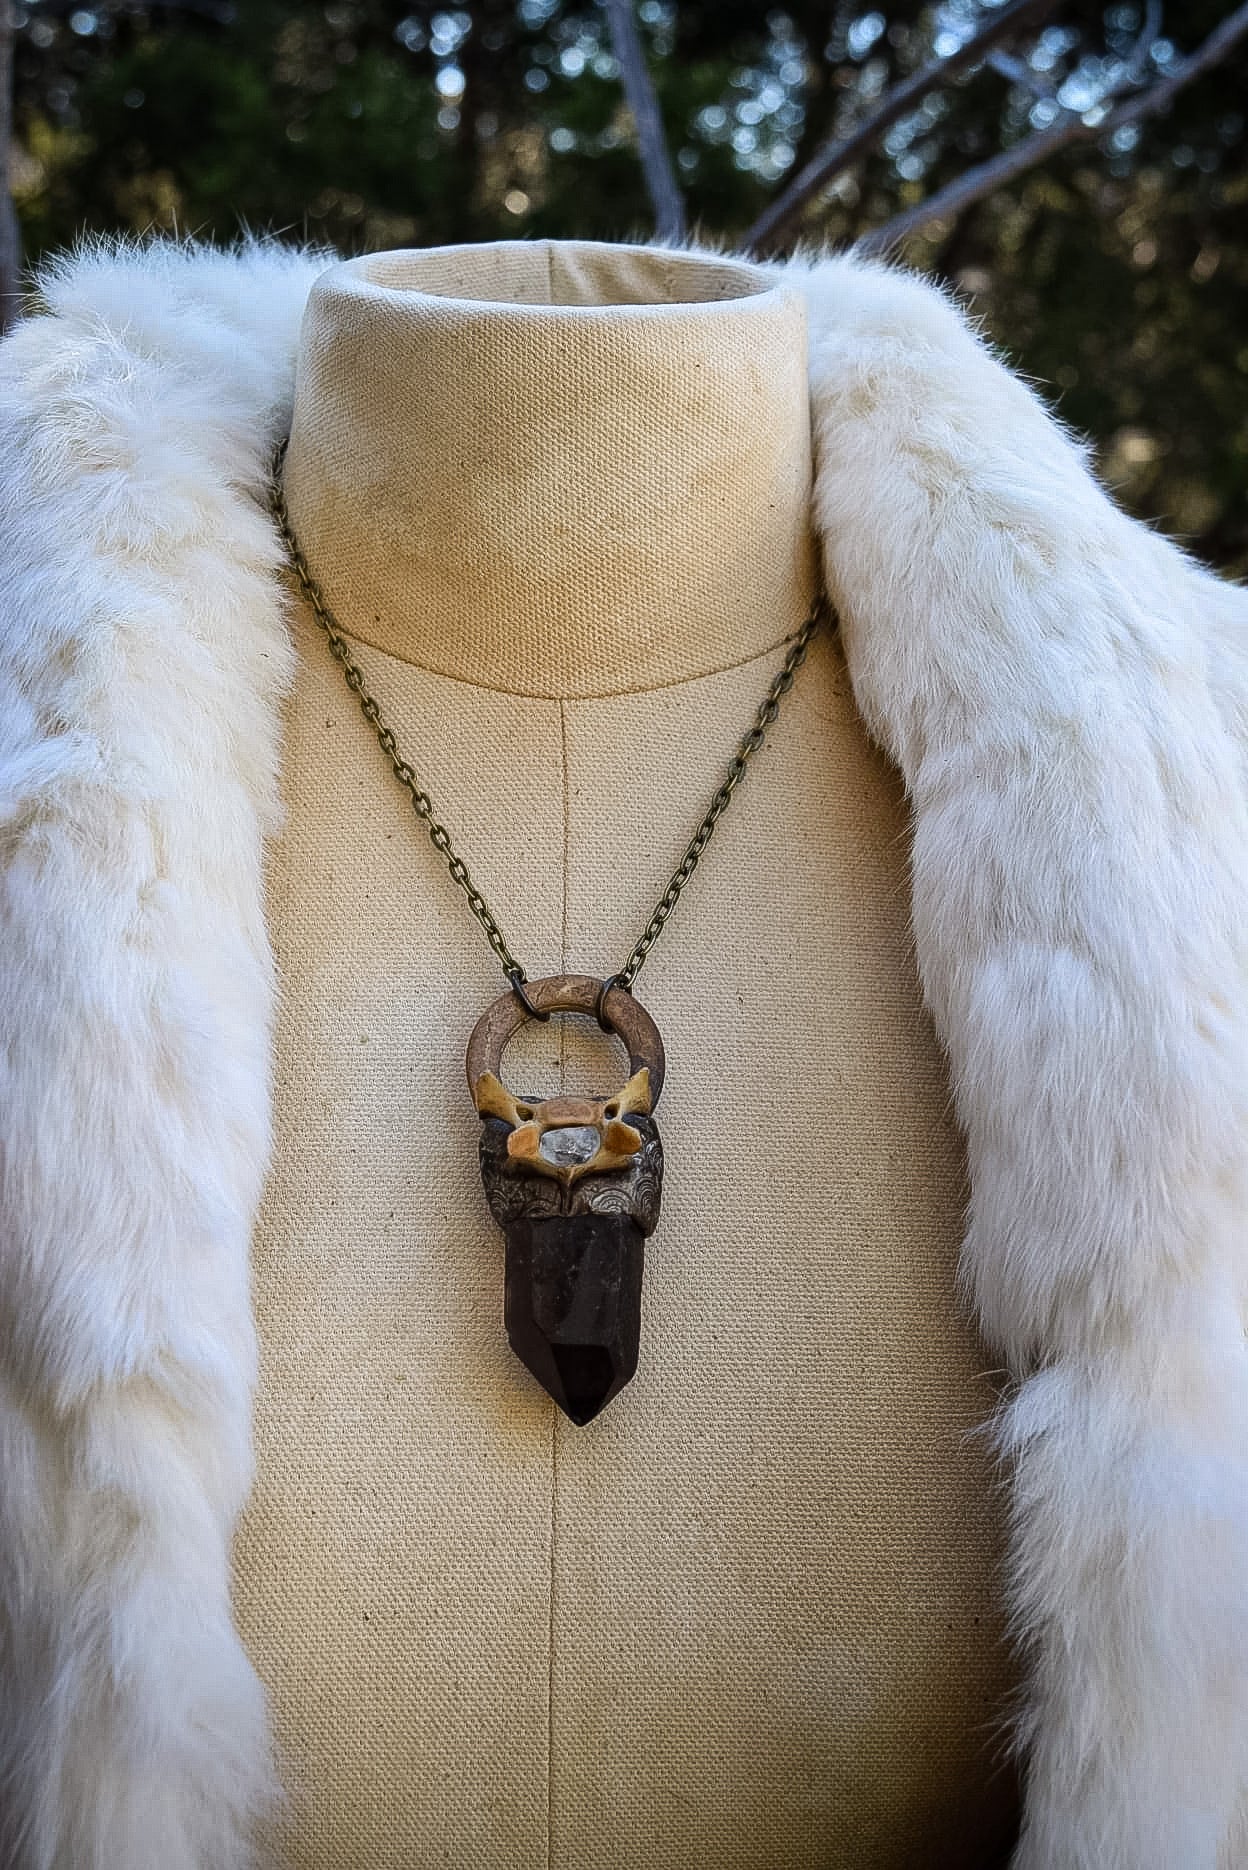 Crystal and Bone Necklace for Connecting with Nature, Wild Creativity and Growth